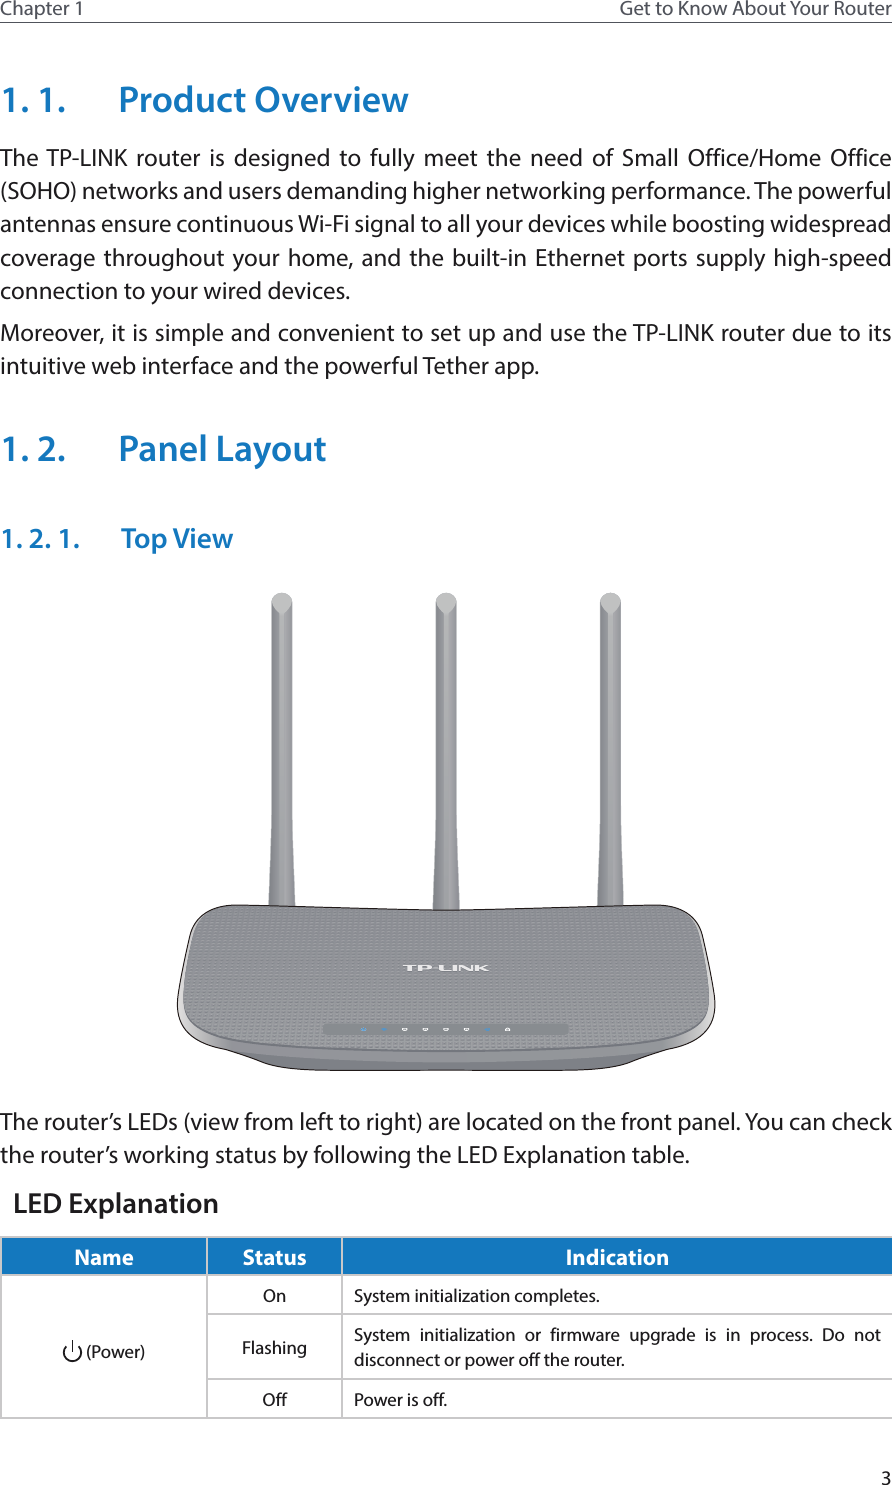 3Chapter 1 Get to Know About Your Router1. 1.  Product OverviewThe TP-LINK router is designed to fully meet the need of Small Office/Home Office (SOHO) networks and users demanding higher networking performance. The powerful antennas ensure continuous Wi-Fi signal to all your devices while boosting widespread coverage throughout your home, and the built-in Ethernet ports supply high-speed connection to your wired devices.Moreover, it is simple and convenient to set up and use the TP-LINK router due to its intuitive web interface and the powerful Tether app.1. 2.  Panel Layout1. 2. 1.  Top ViewThe router’s LEDs (view from left to right) are located on the front panel. You can check the router’s working status by following the LED Explanation table.LED ExplanationName Status Indication (Power)On System initialization completes.Flashing System initialization or firmware upgrade is in process. Do not disconnect or power off the router.Off Power is off.